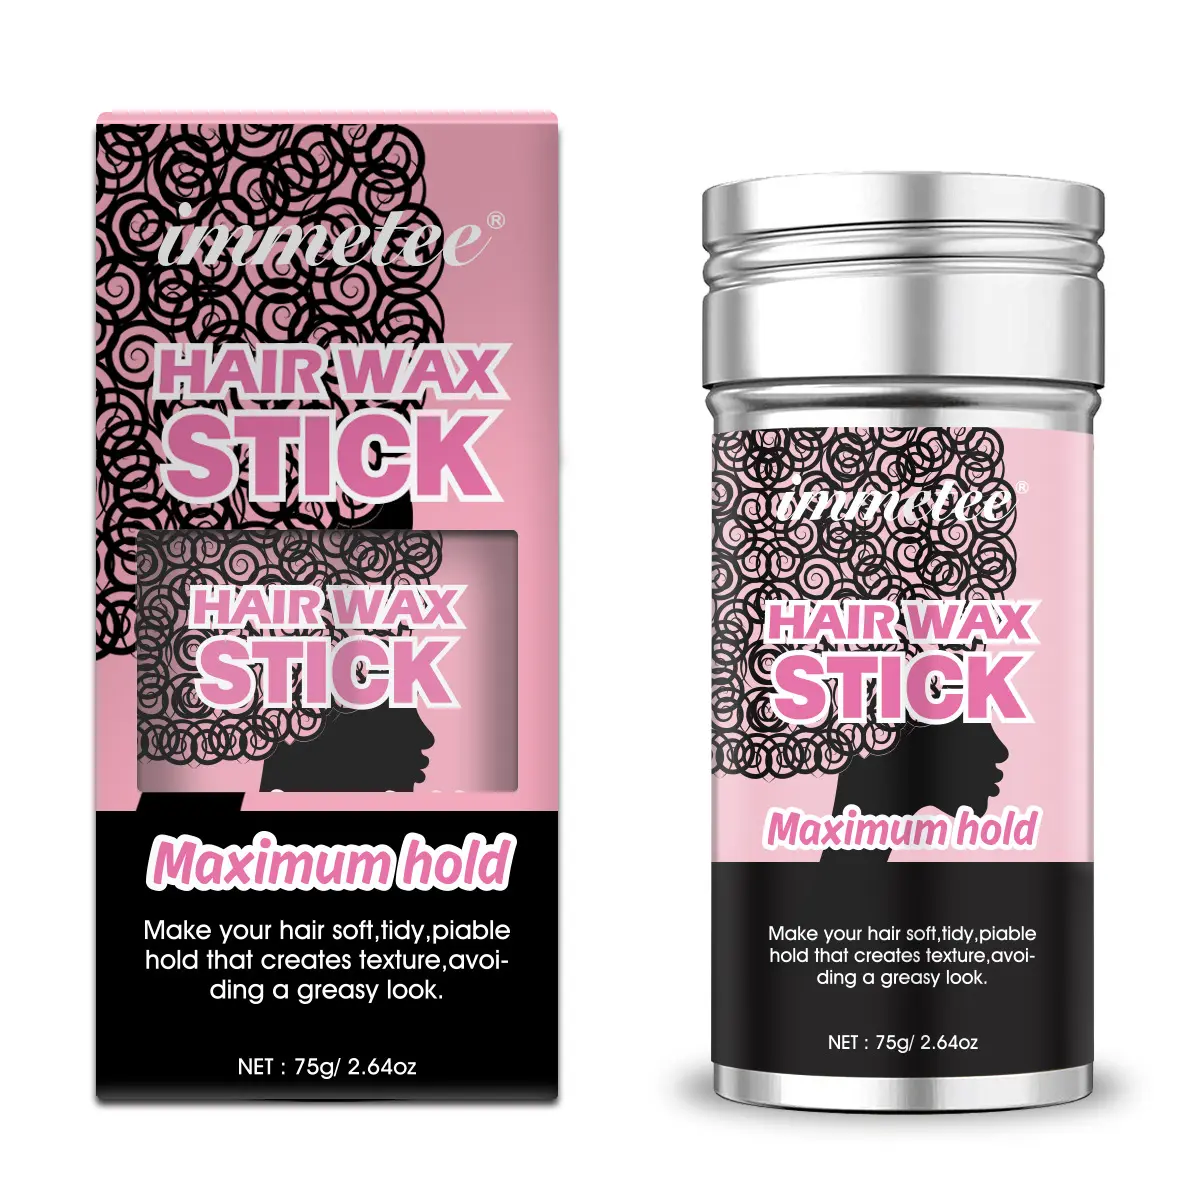 Non-greasy Styling Medium Hold Hair Wax & Pomade Stick for Flyaways & Edge Frizz Hair